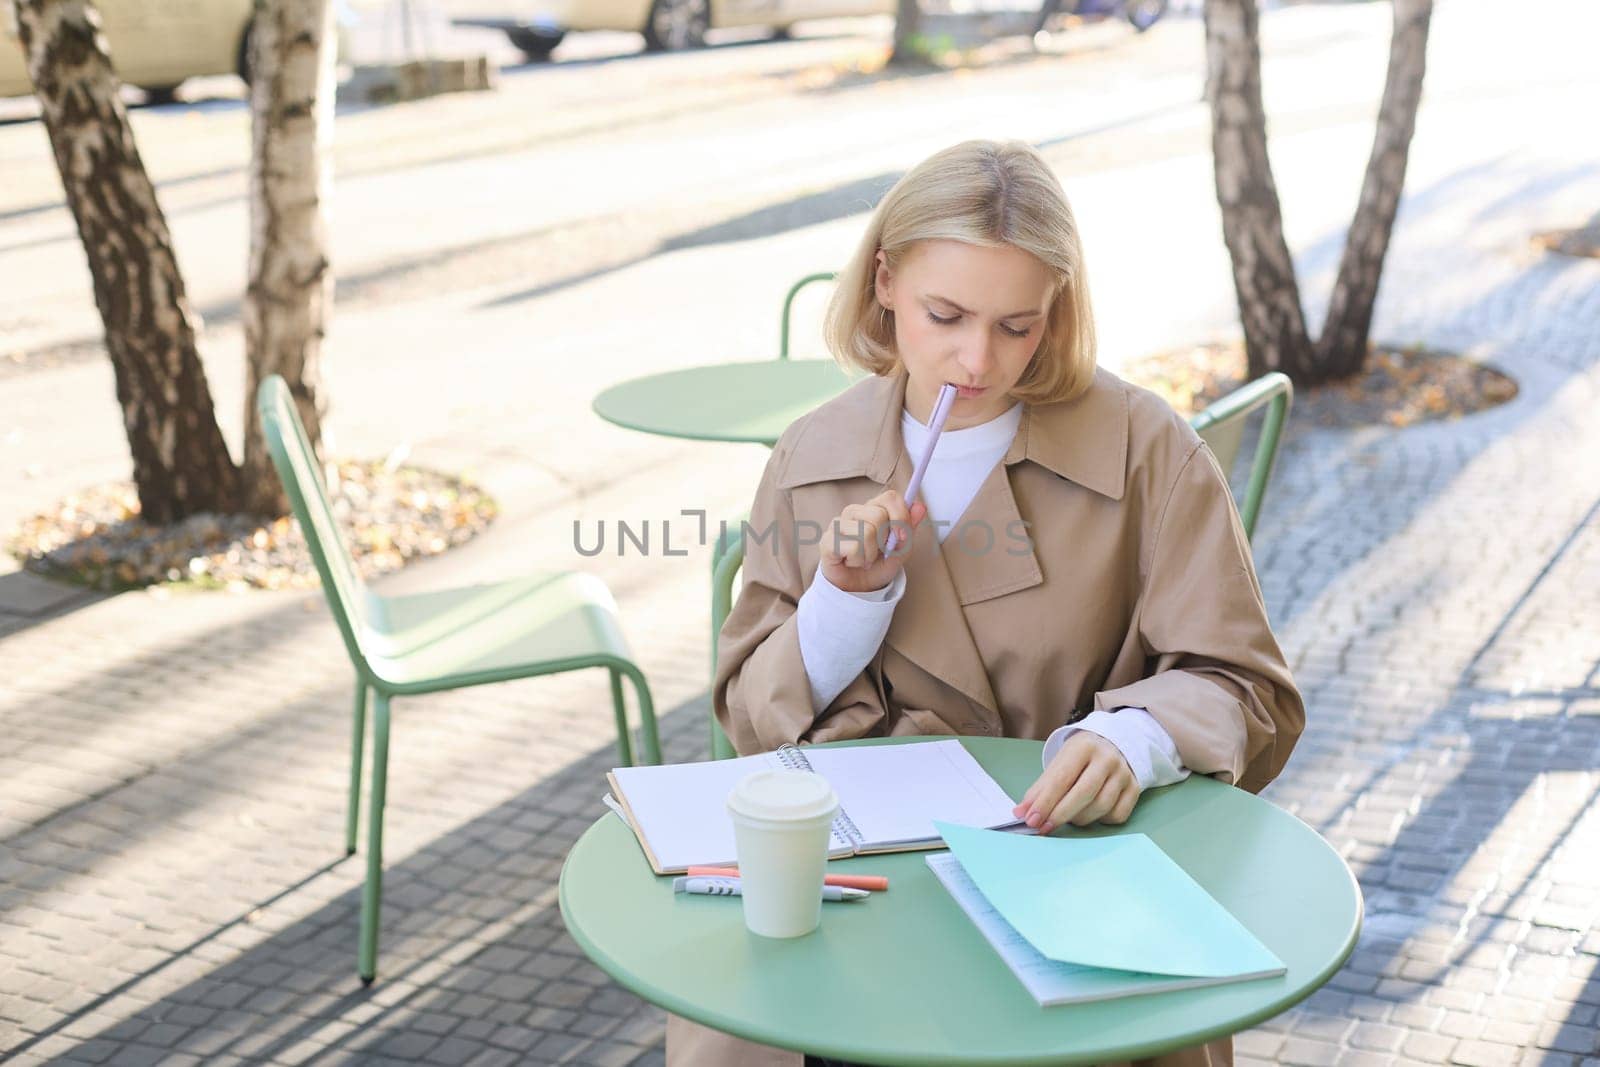 Portrait of young woman thinking while doing homework, sitting in outdoor cafe alone, drinking coffee and writing in notebook, looking thoughtful, pondering smth.